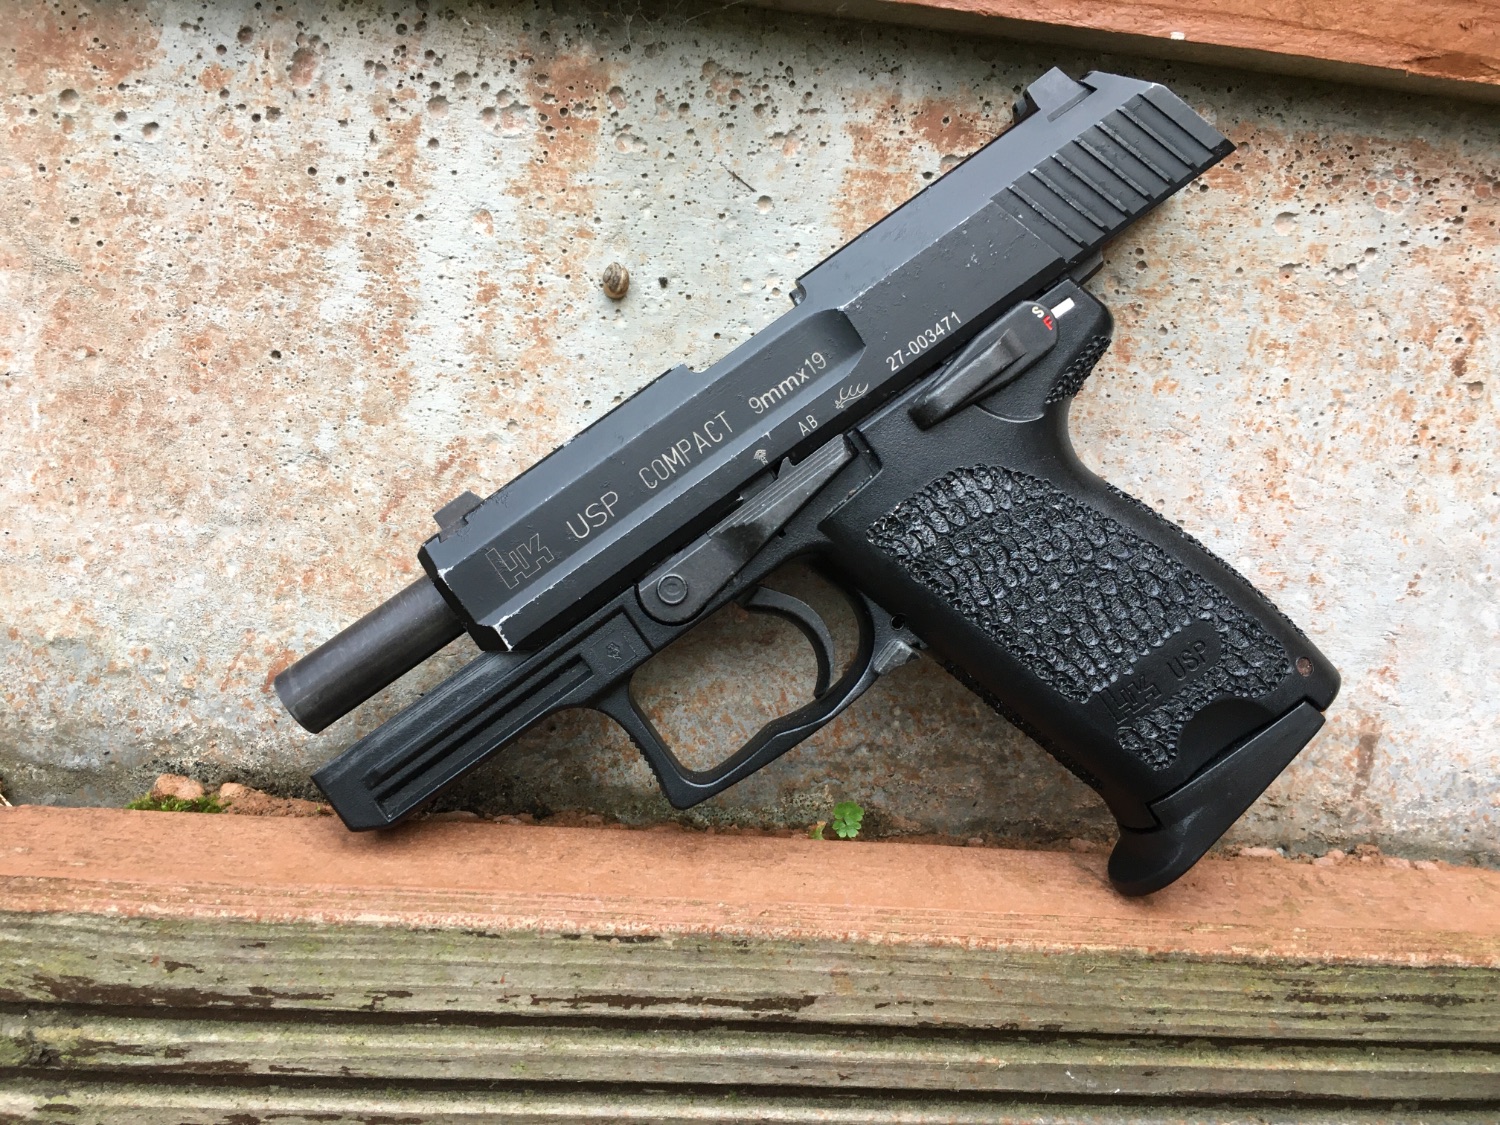 HK USP Compact - Gas Pistols - Airsoft Forums UK